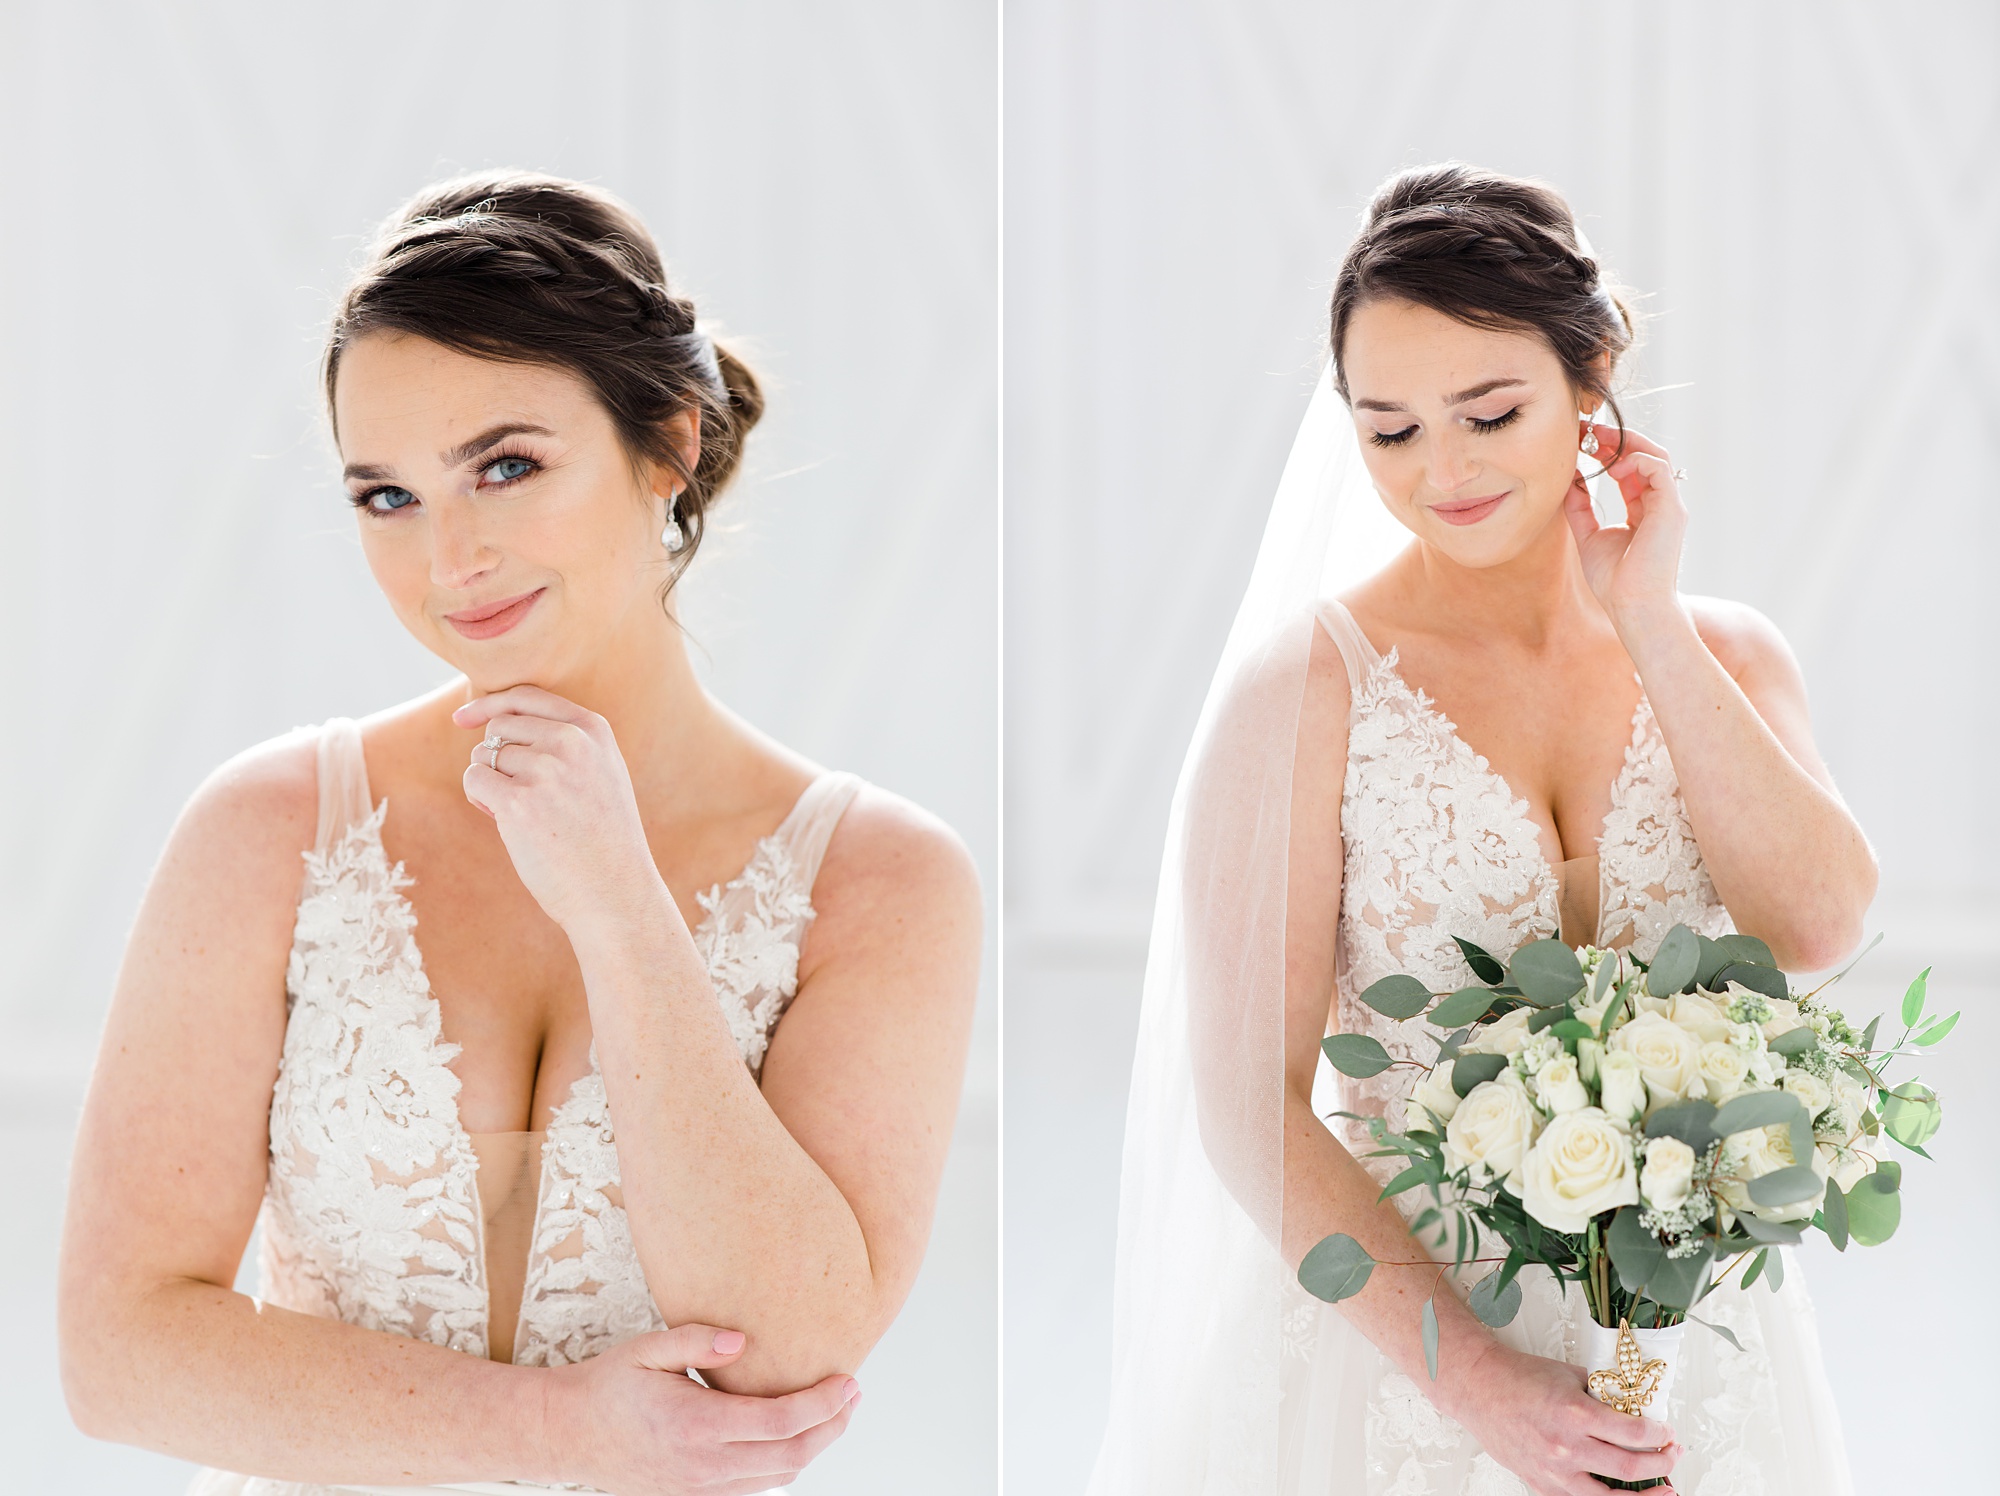 Dallas bridal portraits with bouquet of white flowers and cathedral veil